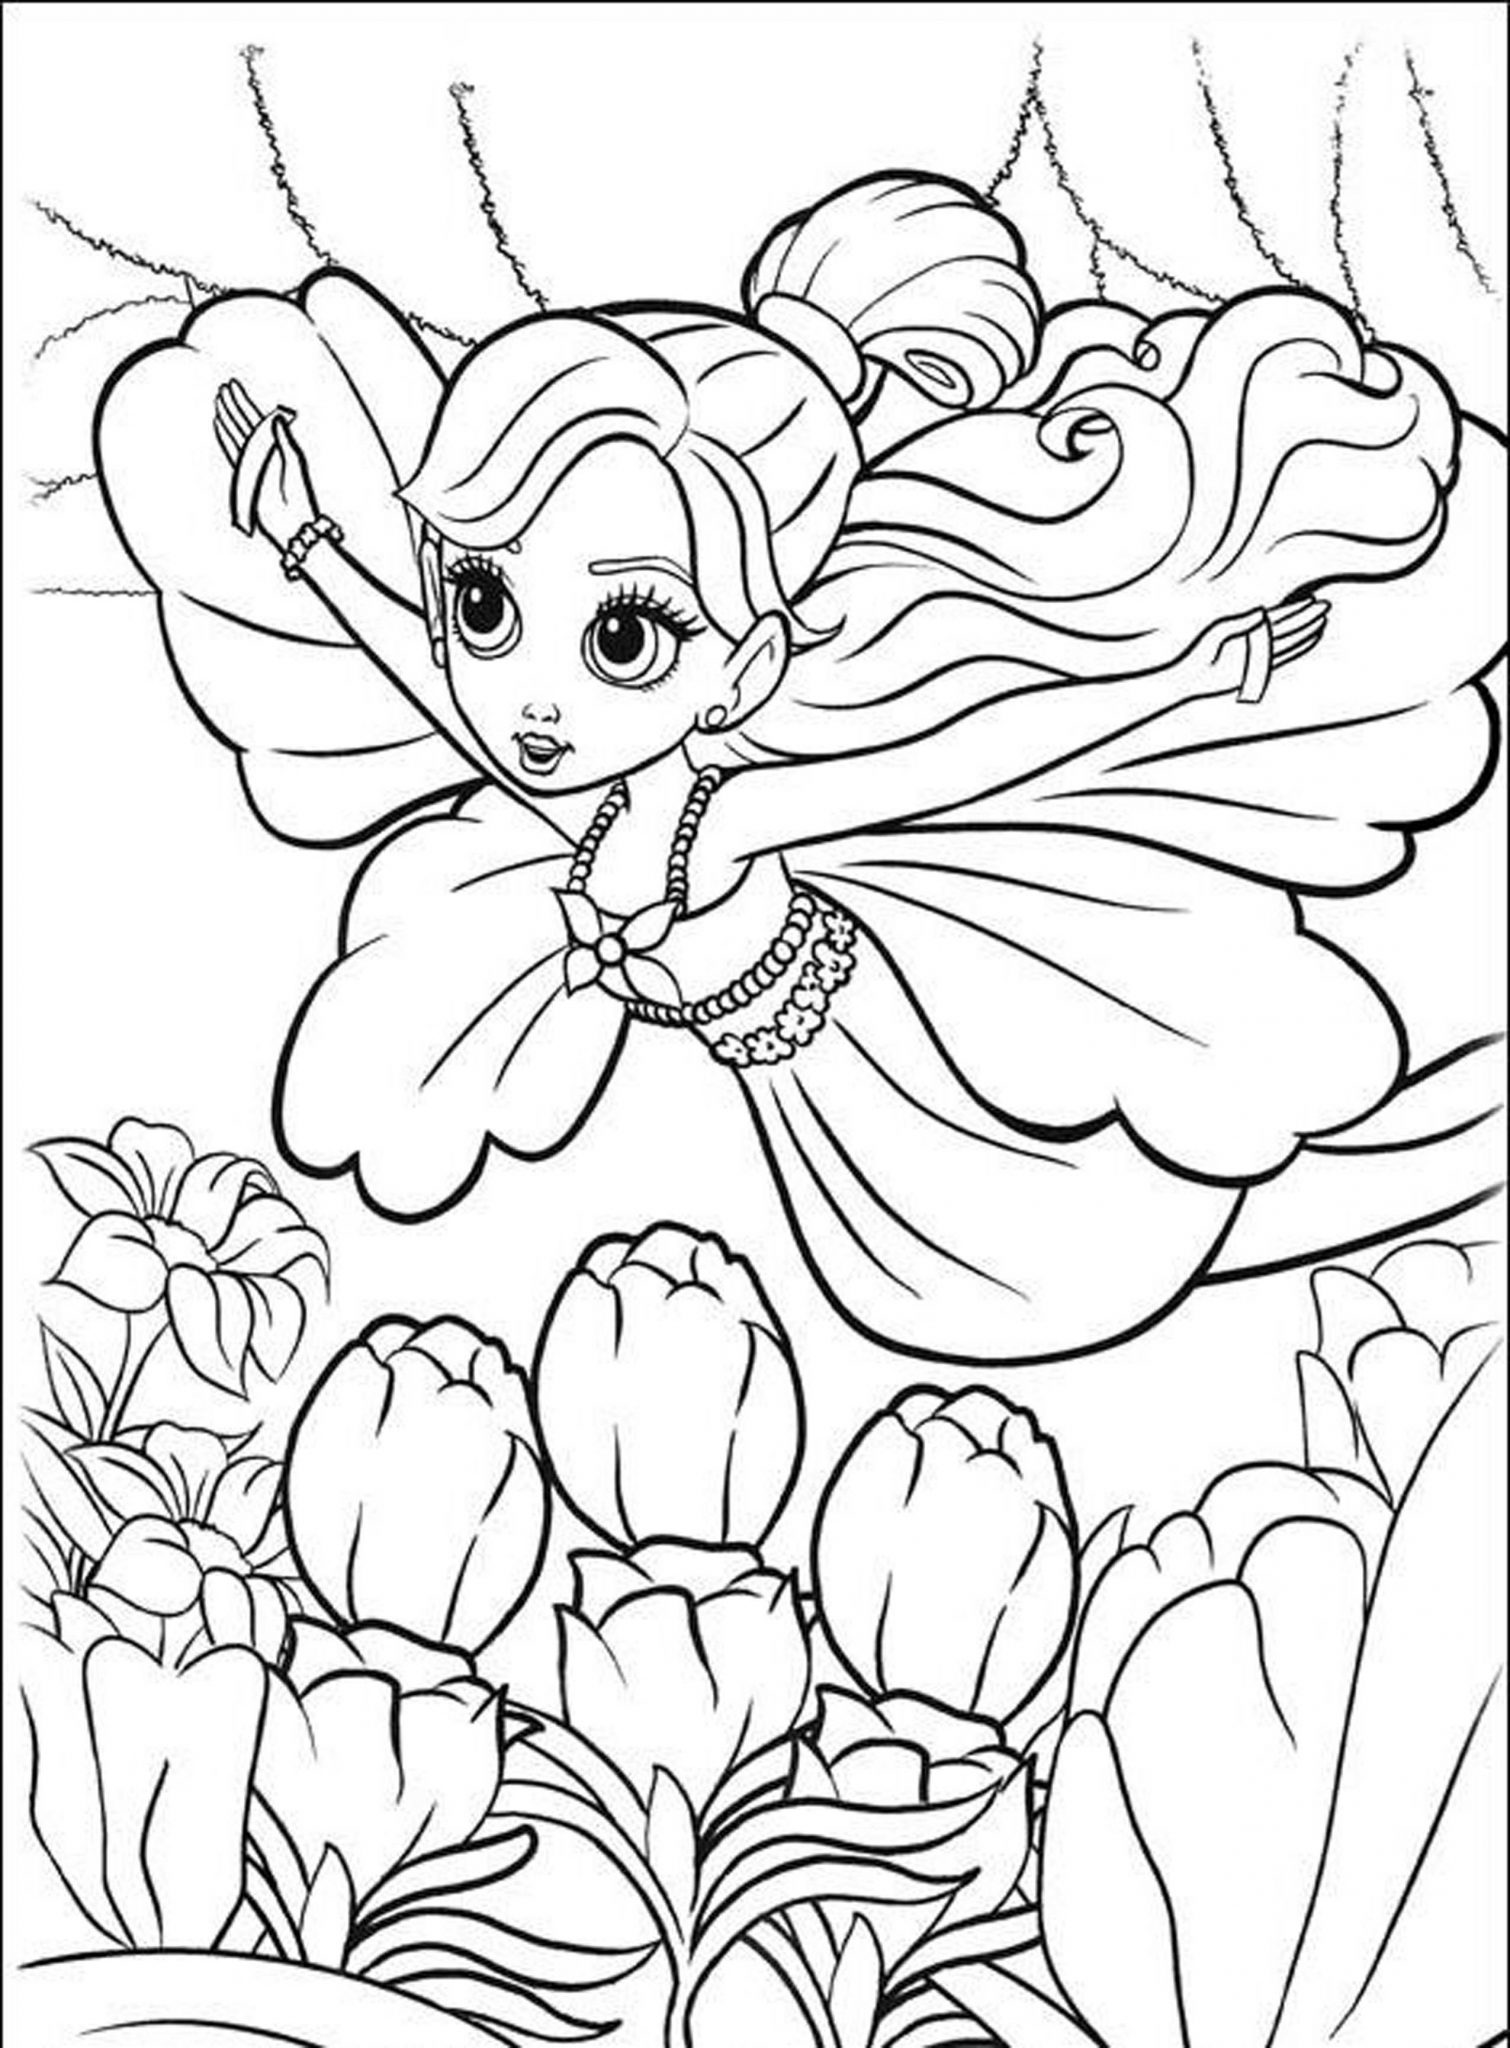 Coloring pages for girls - rockslimo